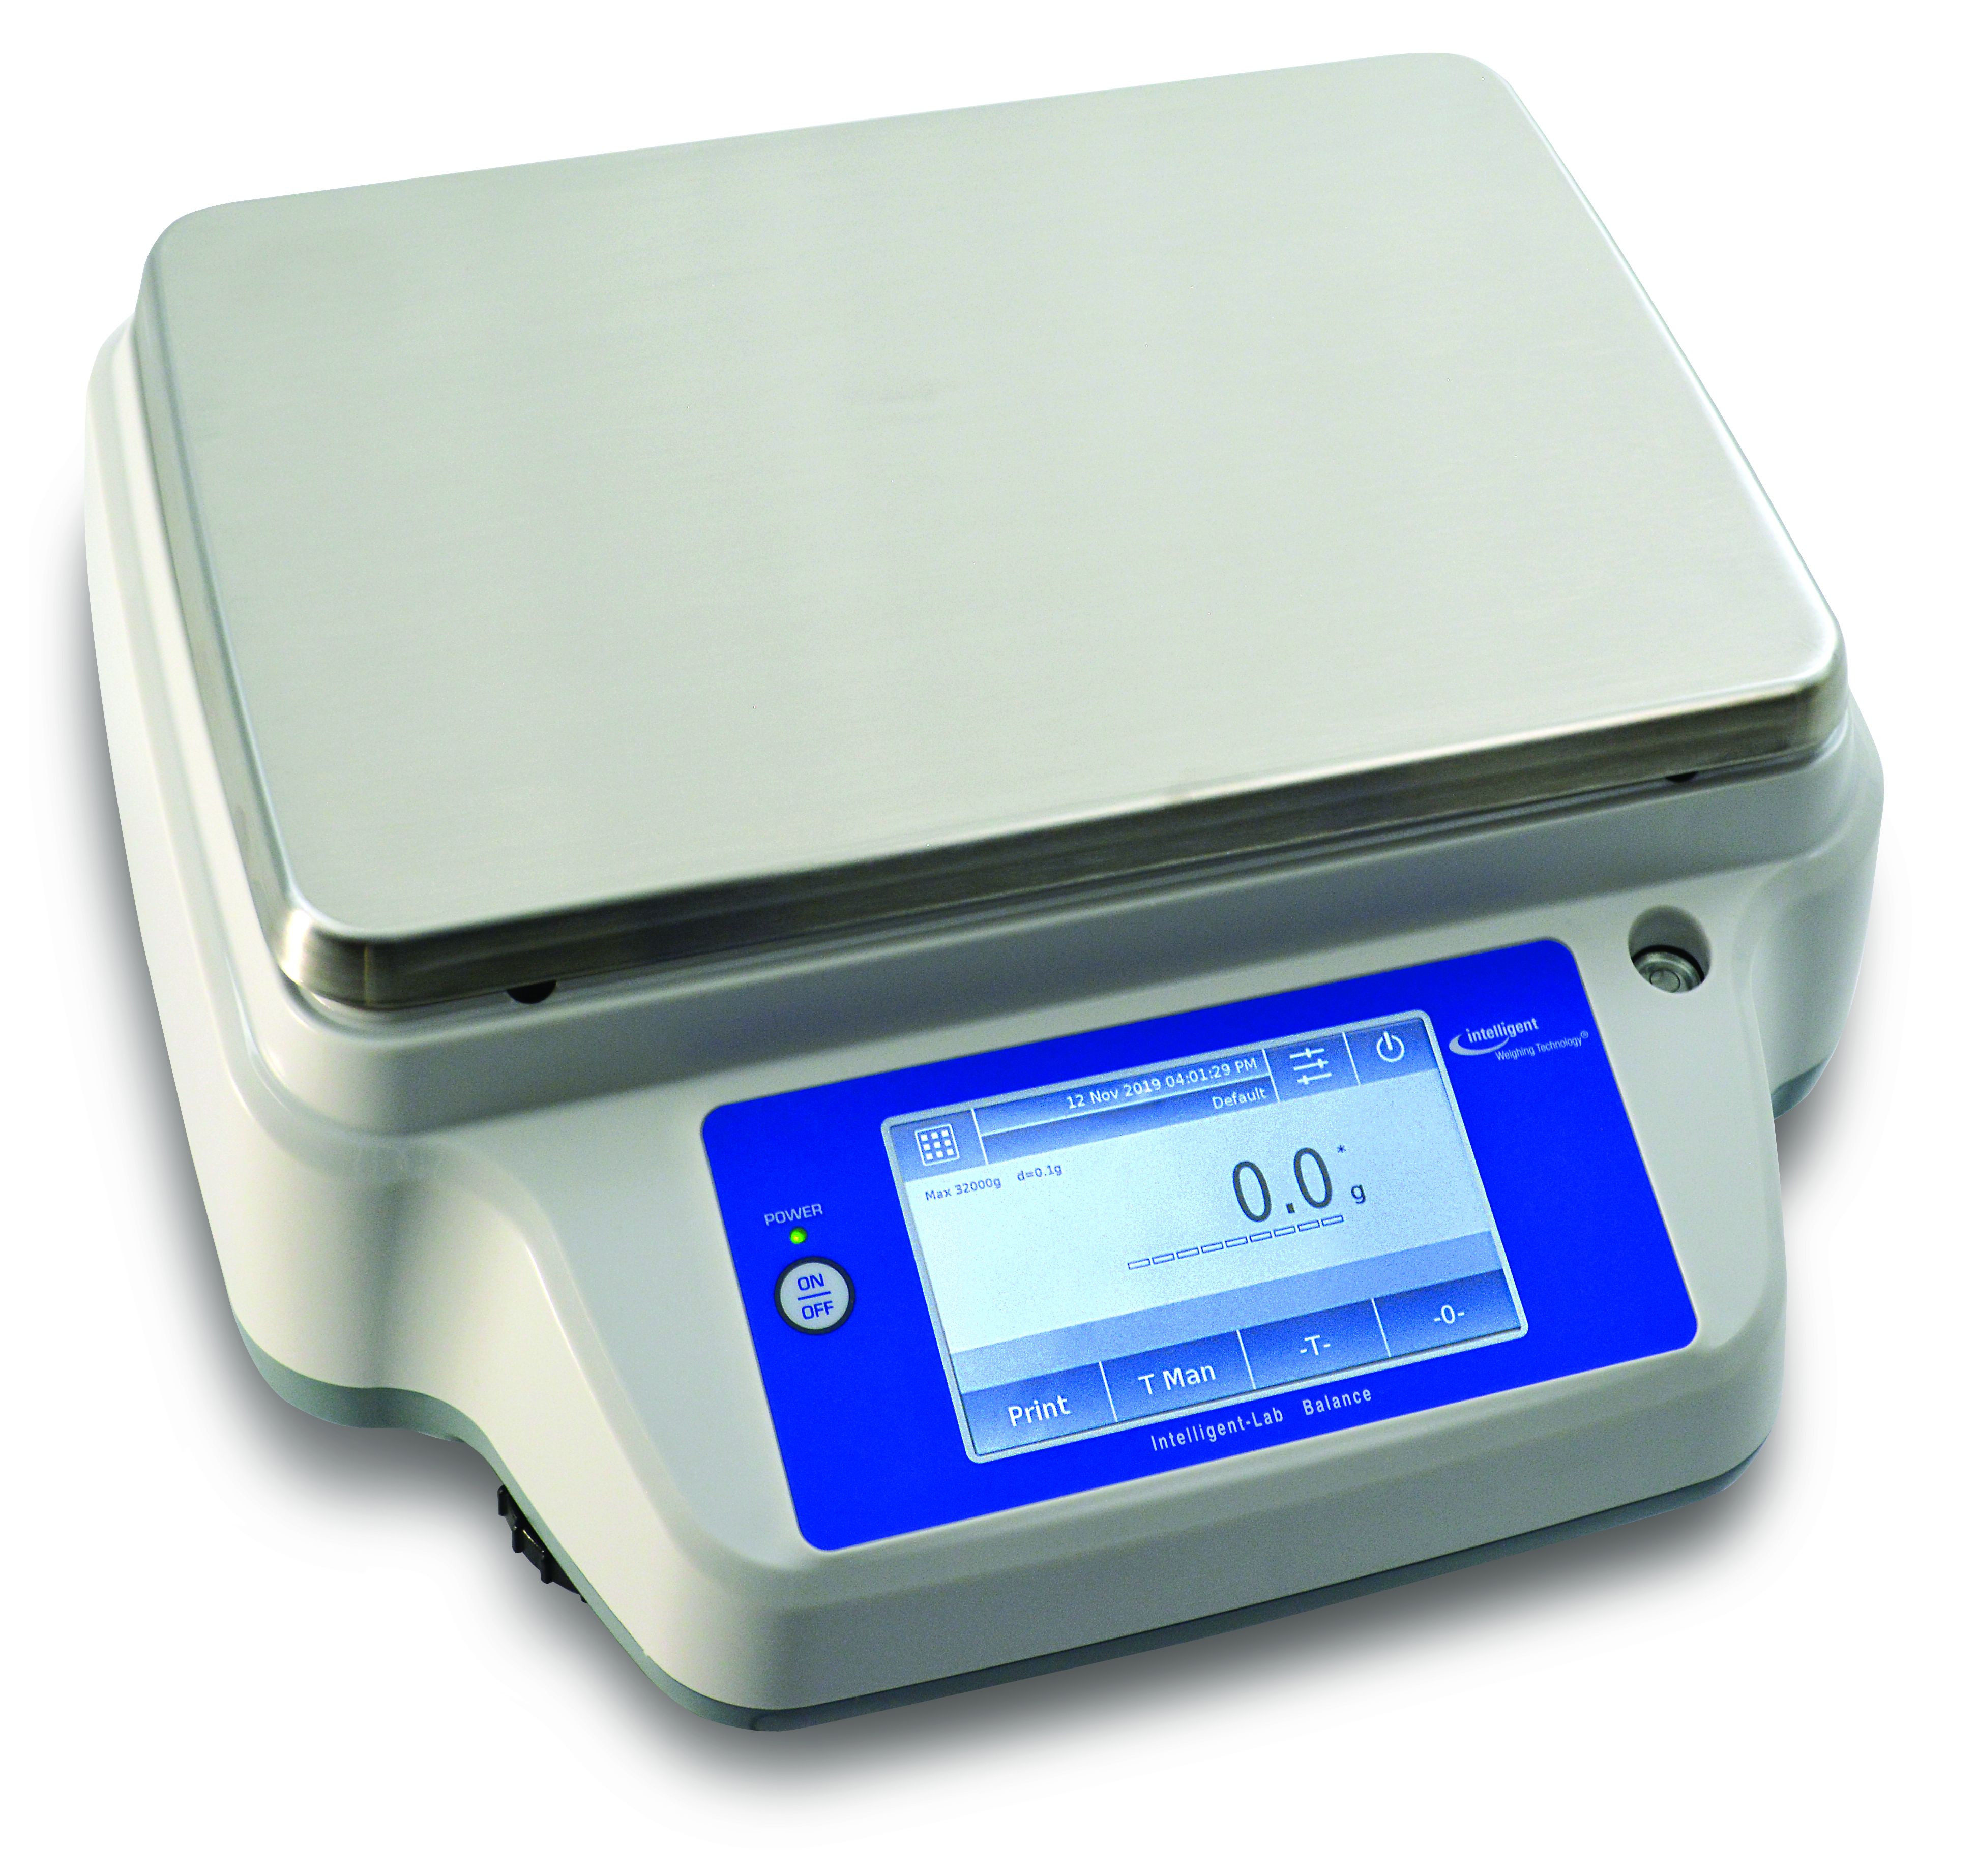 https://www.aaaweigh.com/media/catalog/product/cache/1/thumbnail/9df78eab33525d08d6e5fb8d27136e95/i/n/intelligent-weighing-ph-touch-series-scale.jpeg